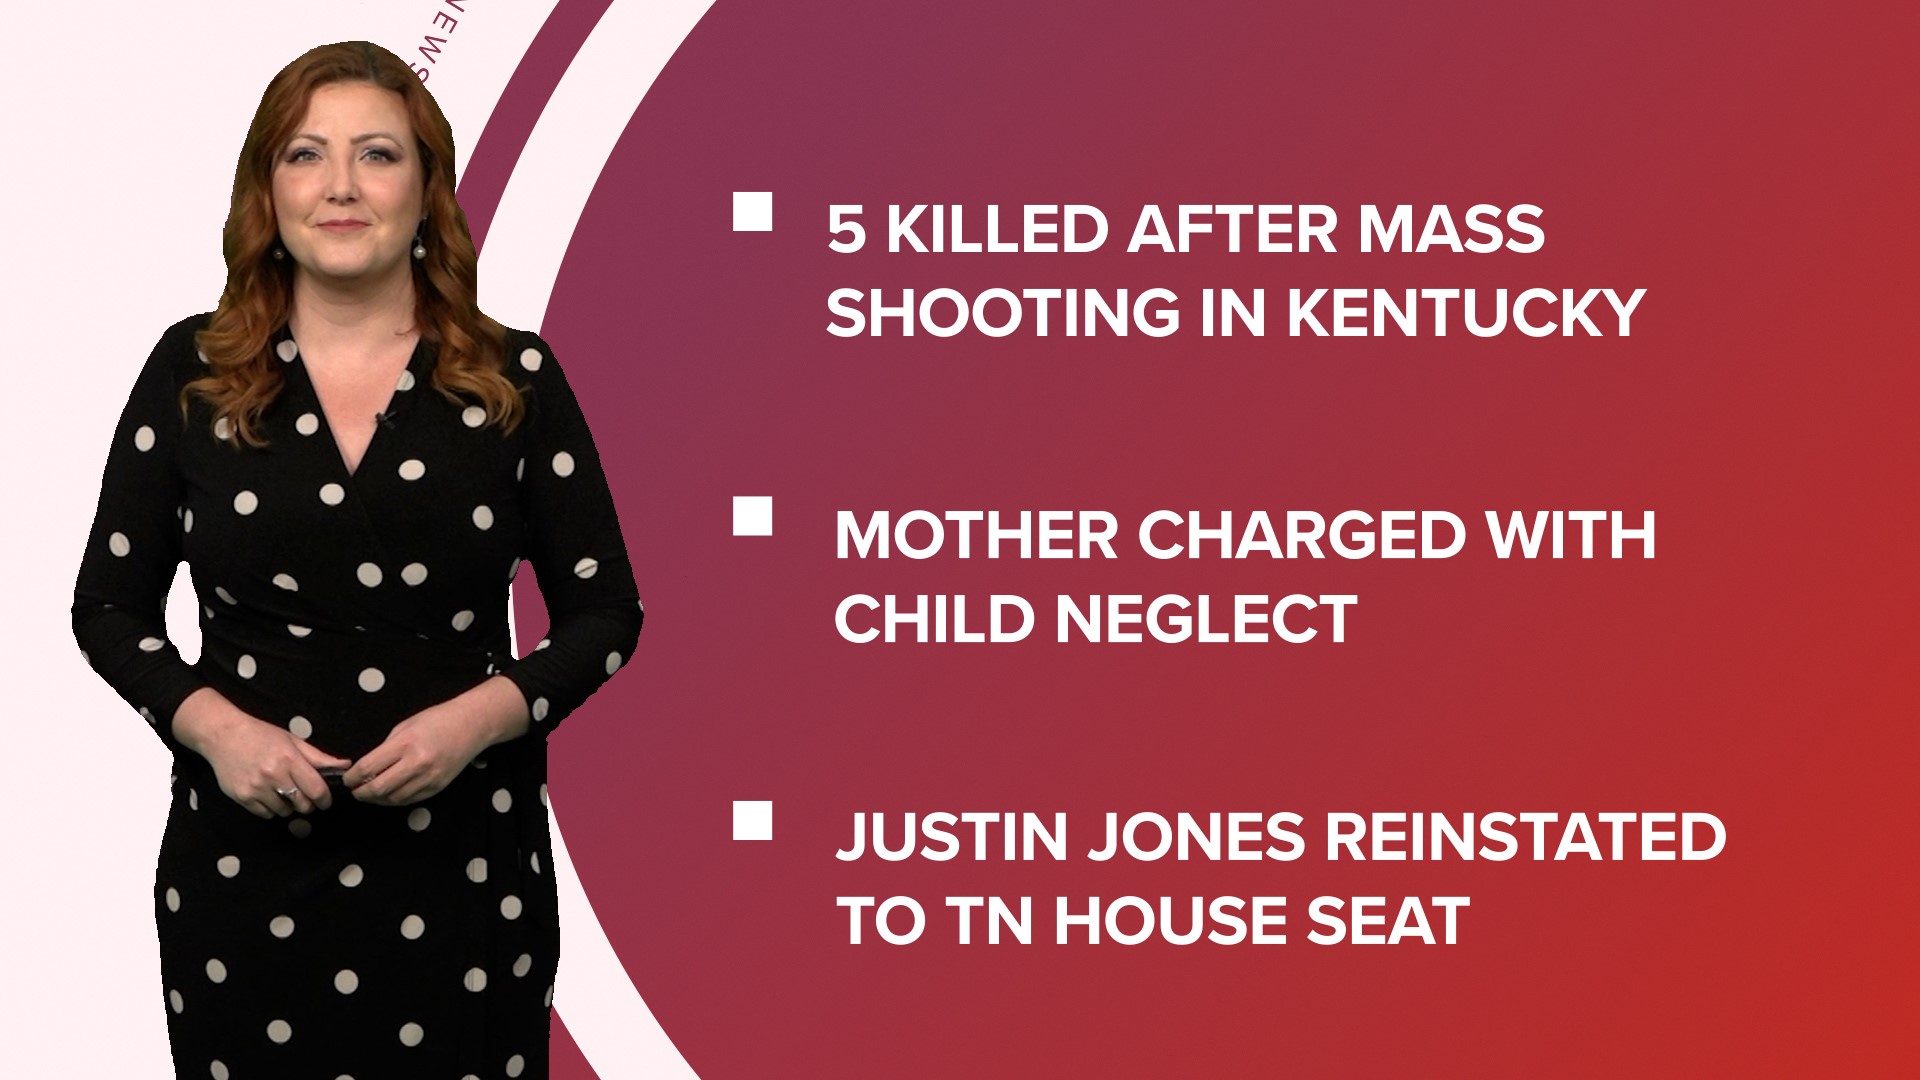 A look at what is happening in the news from five killed in a mass shooting in Louisville to a mother charged after her 6-year-old son shoots his teacher.